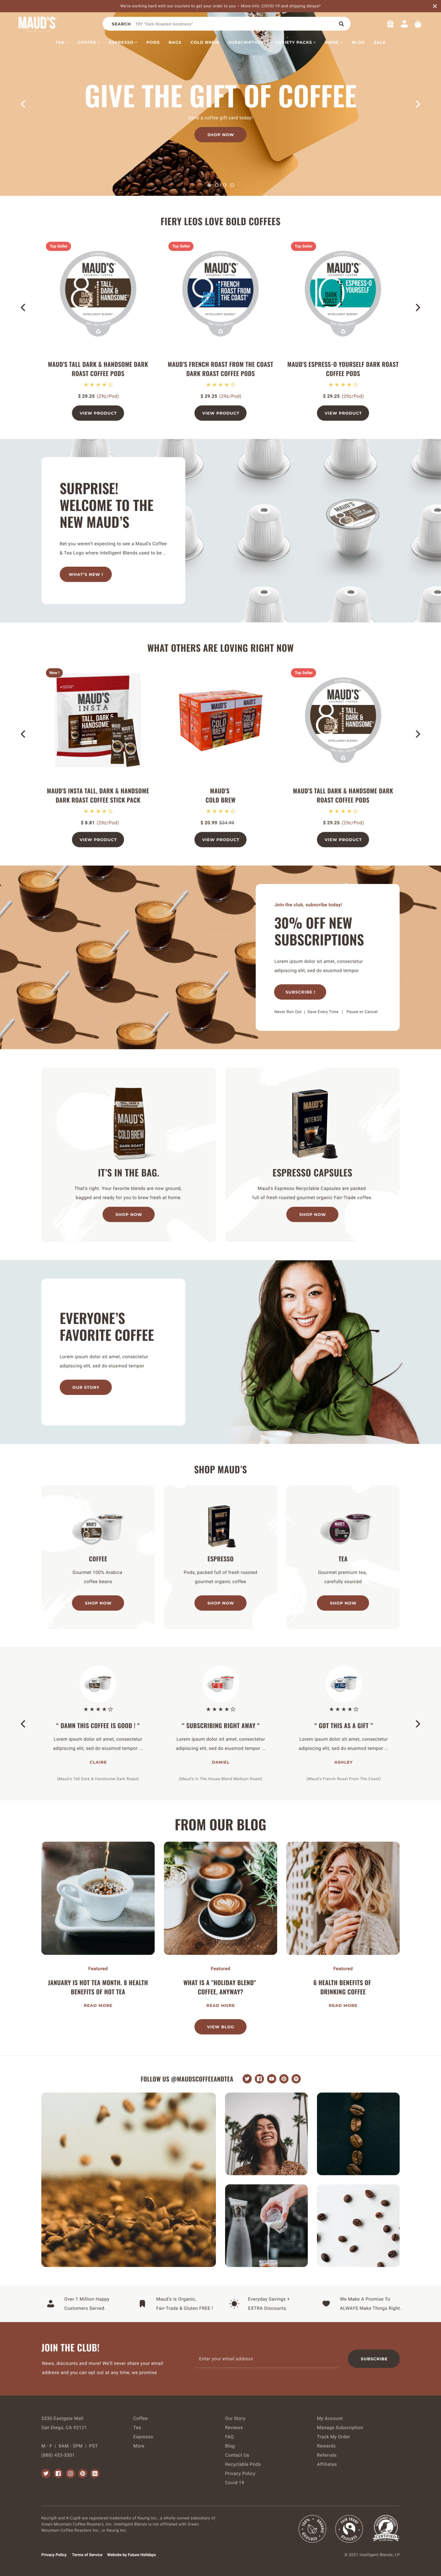 maud's brand gourmet coffee promotions and products